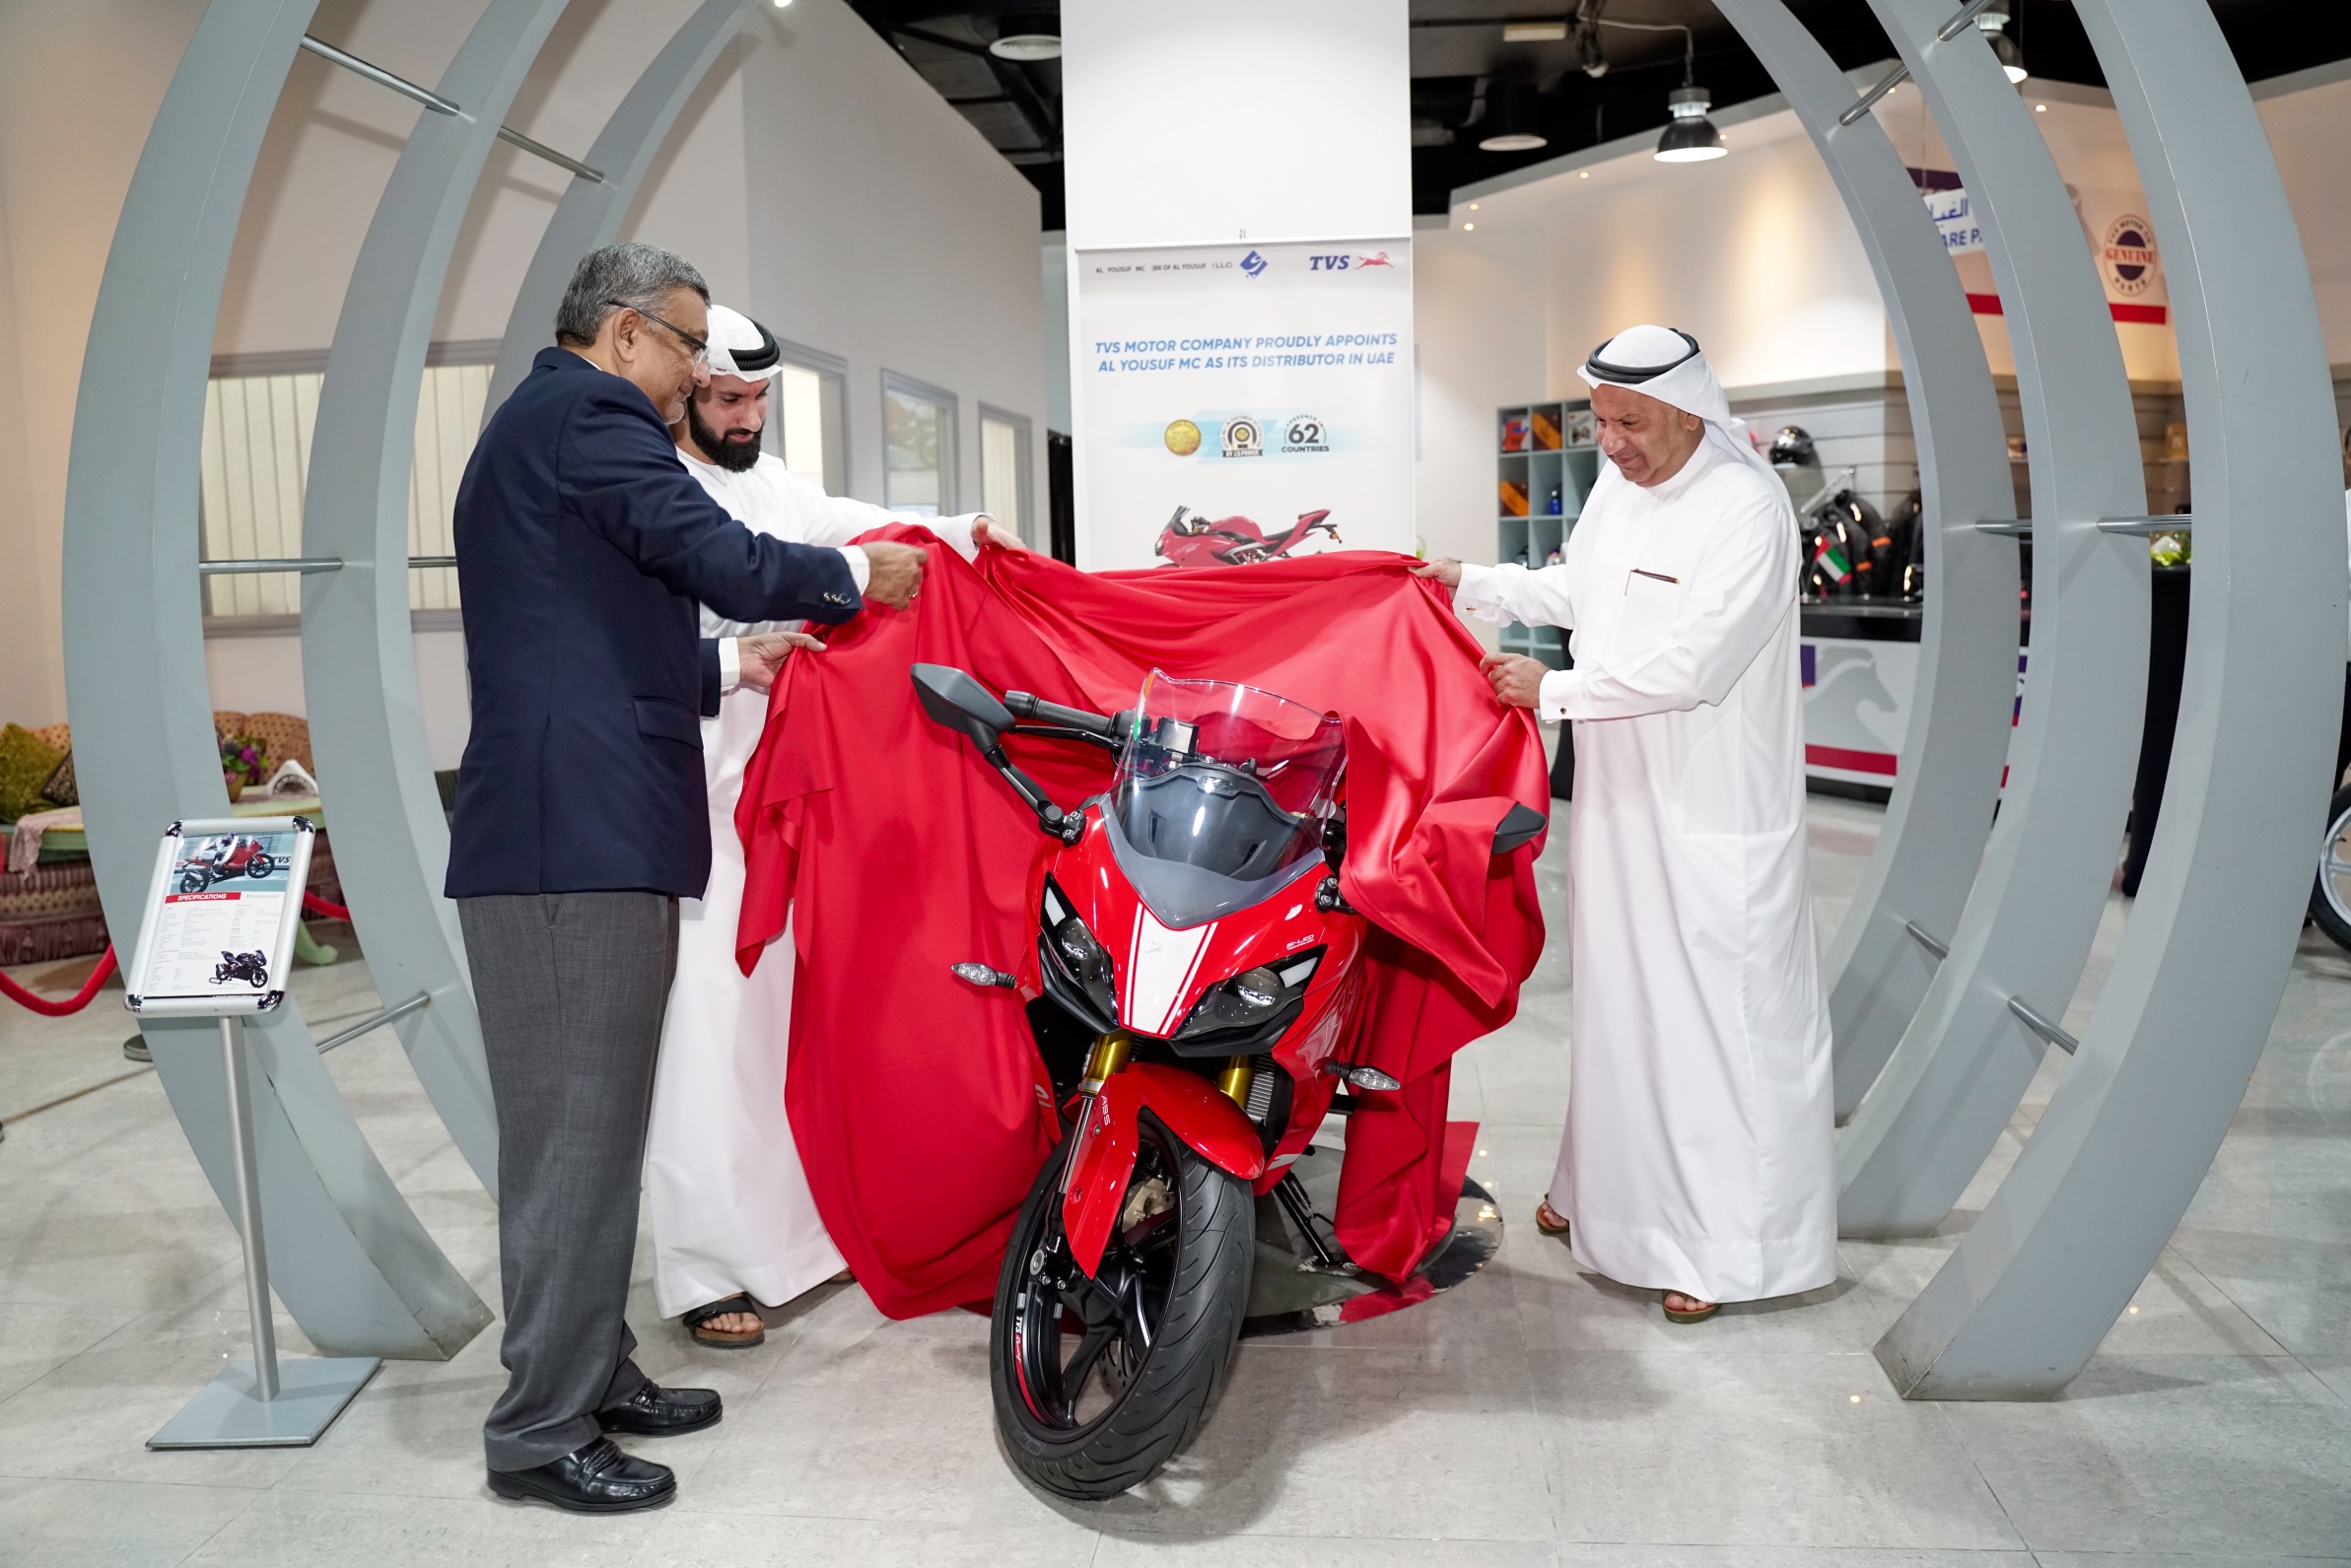 Mr. R Dilip, Executive Vice President - International Business, TVS Motor Company and Mr. Ahmad Al Yousuf, Chief Executive Officer, Al Yousuf LLC inaugurating the TVS Showroom in Dubai